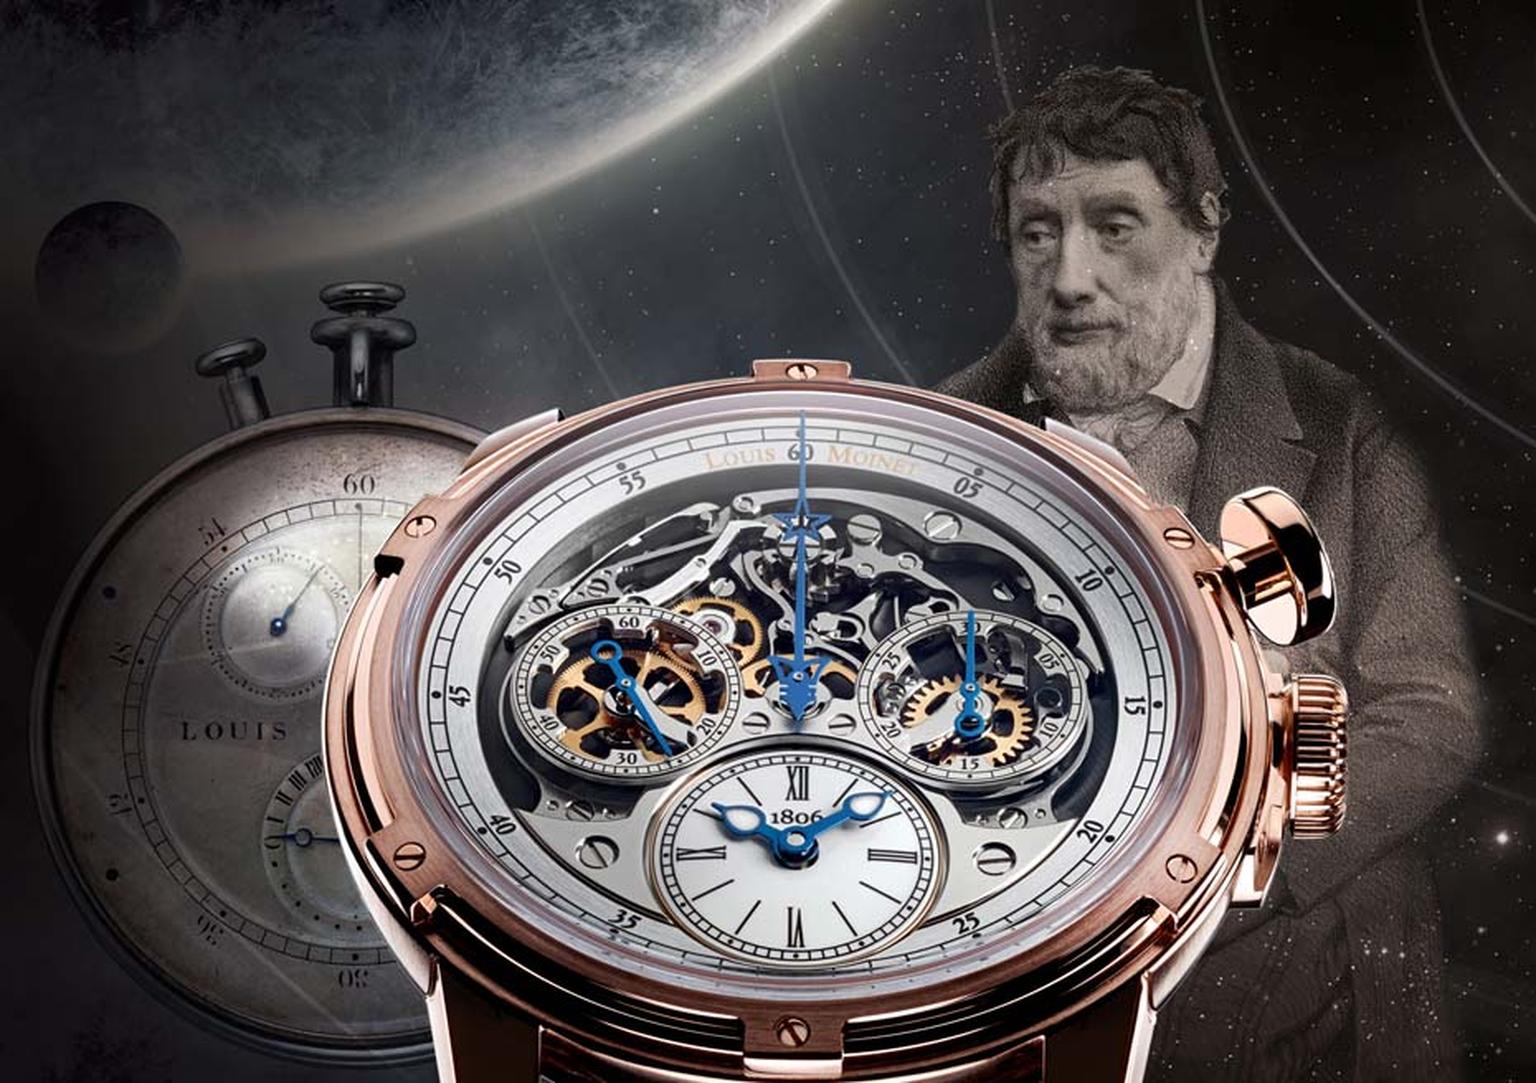 The Louis Moinet Memoris chronograph stands at a crossroads for the brand, celebrating the bi-centenary of the world's first chronograph, invented by Louis Moinet in 1816, and the brand's rebirth a decade ago in the hands of Jean-Marie Schaller.